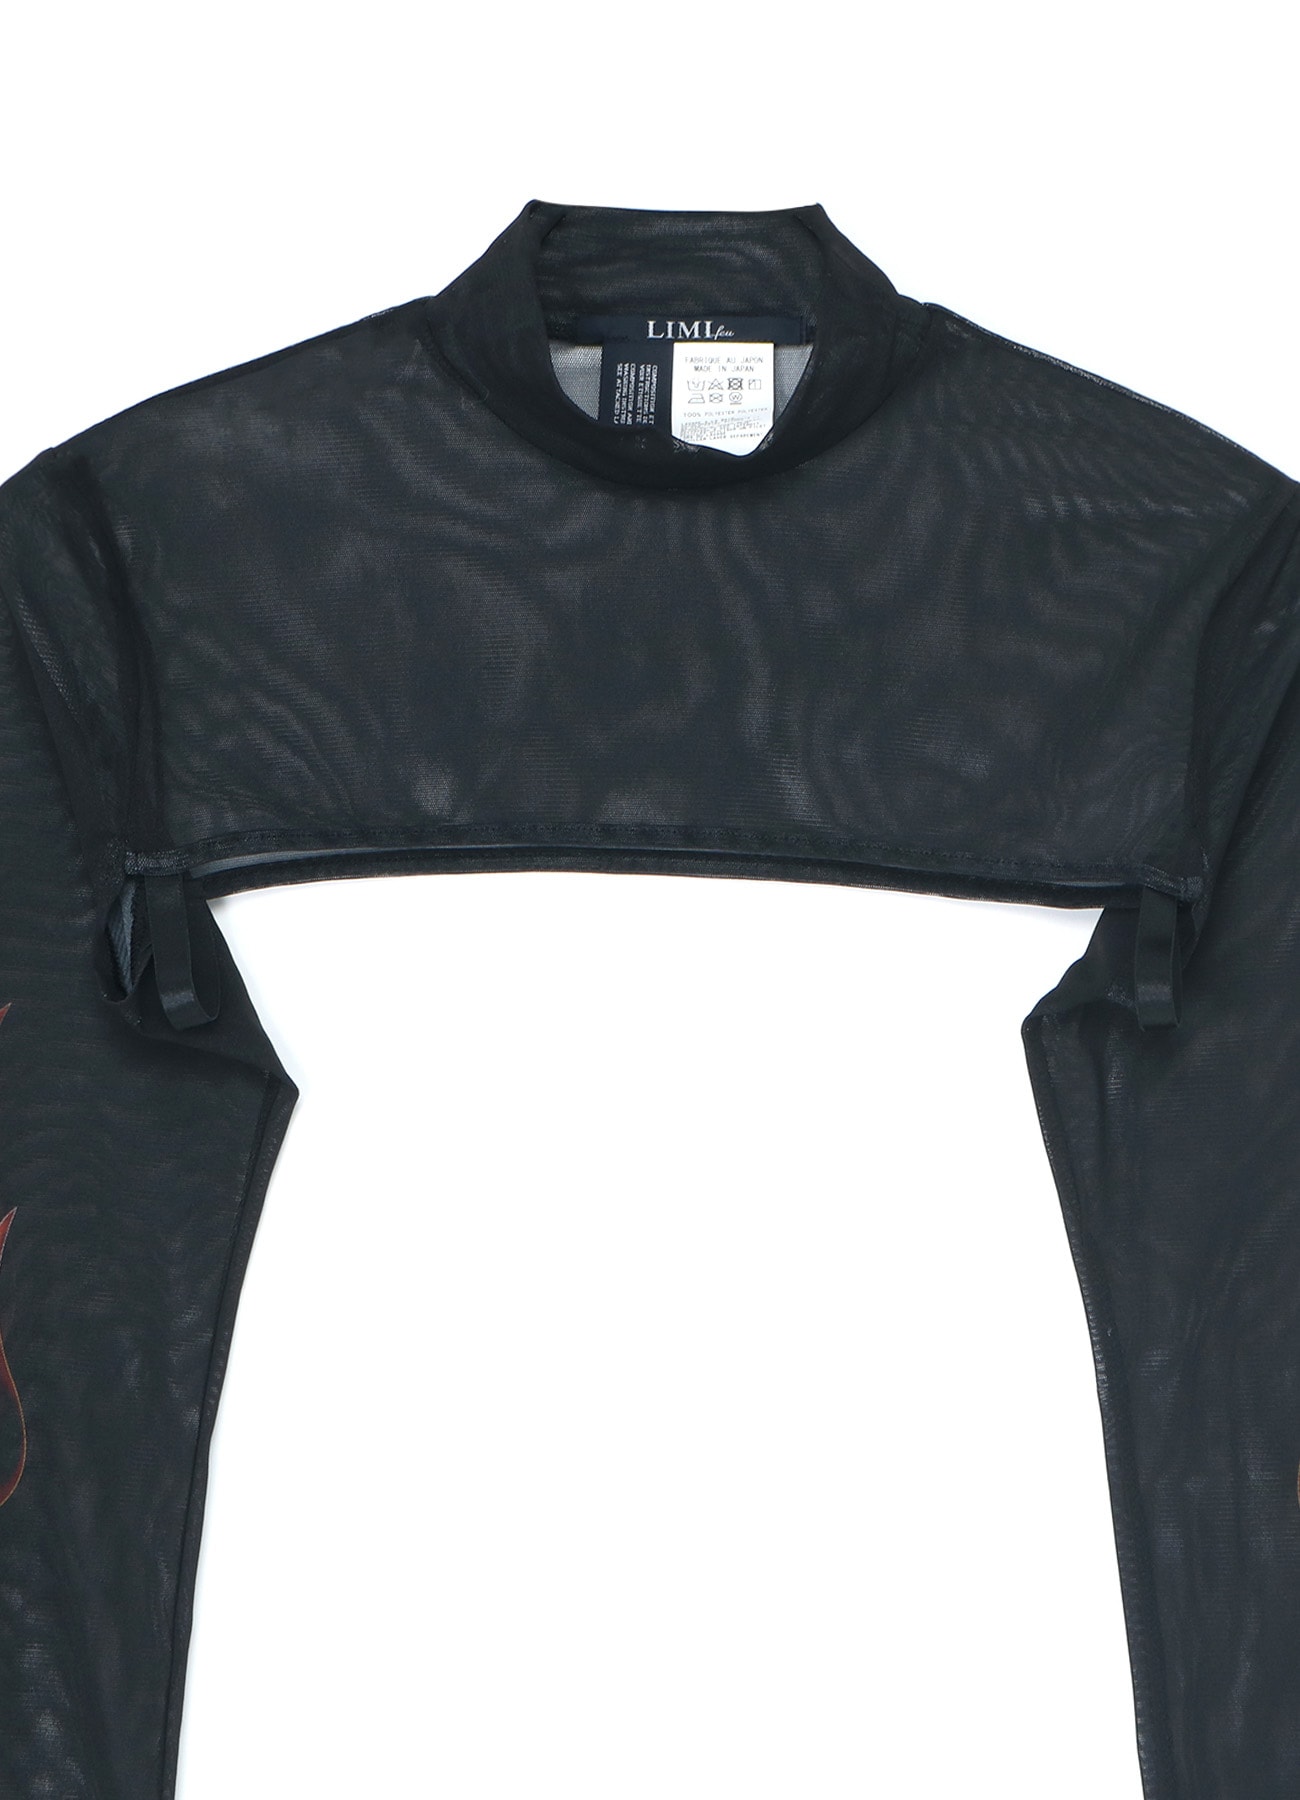 Reclaimed Vintage extreme cropped top with long sleeves